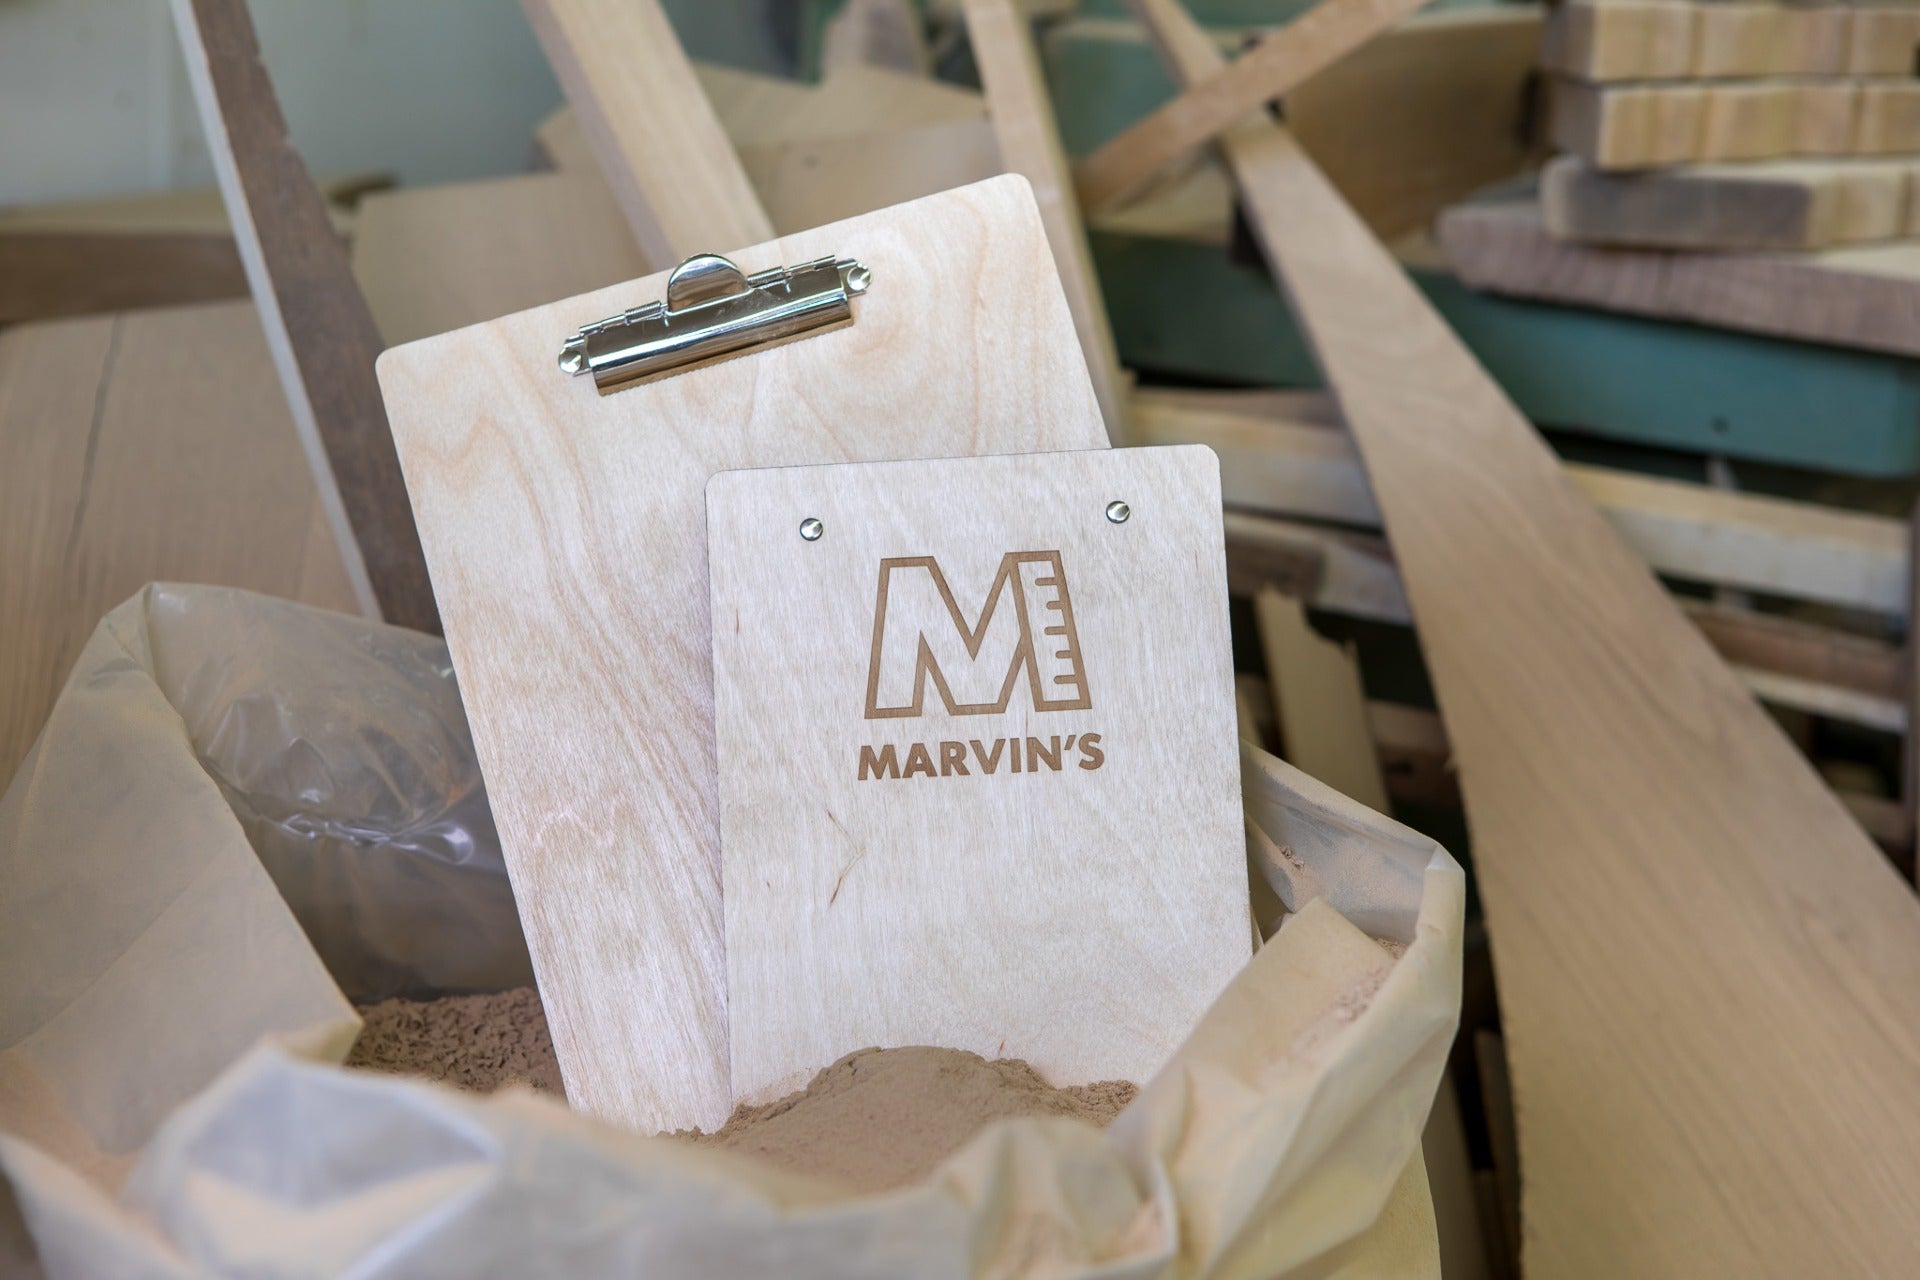 Engraving in glass and wood | Marvins,